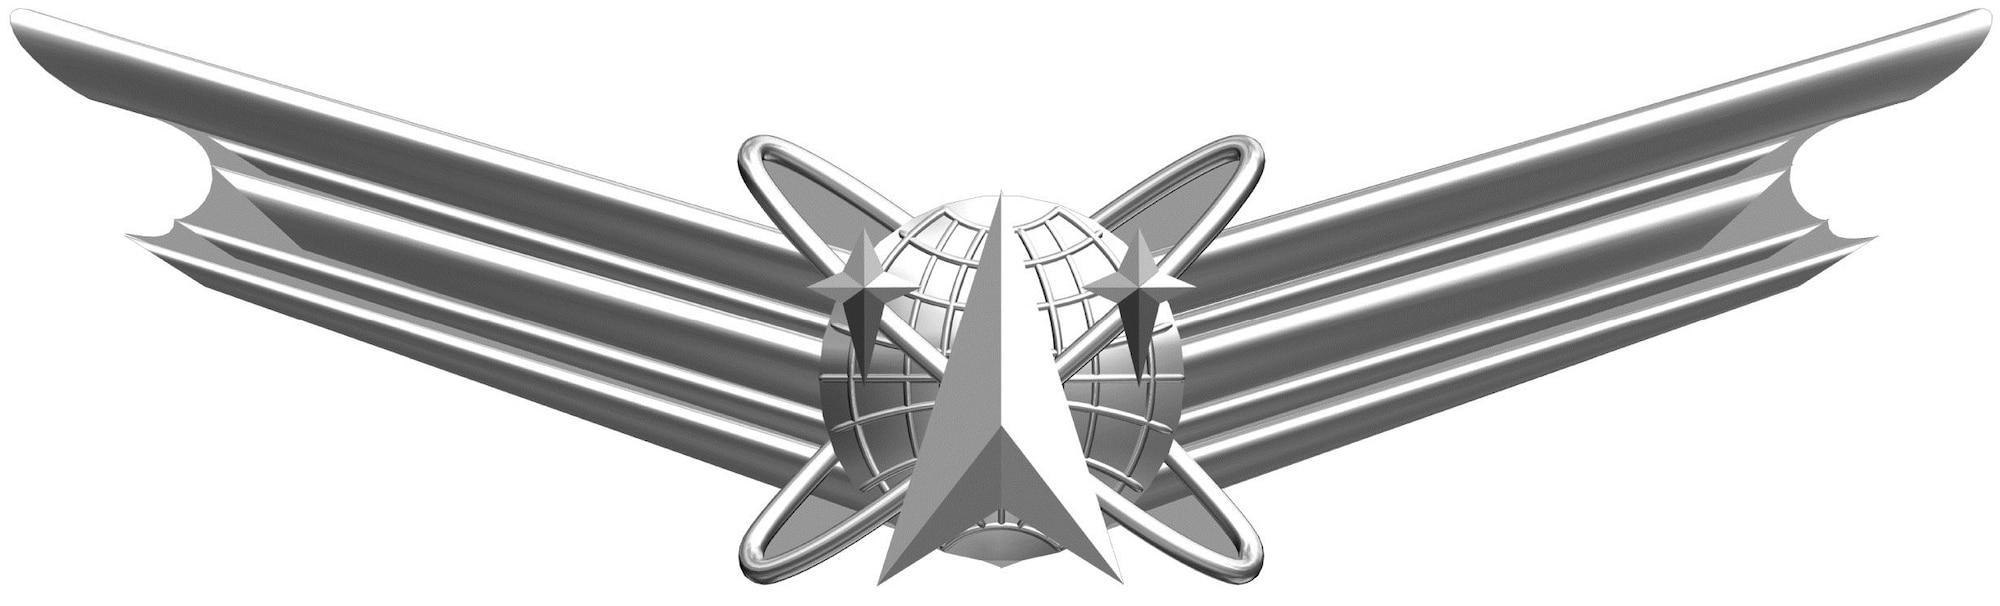 The Space Badge can be awarded to active Army, Army Reserve and National Guard Soldiers who successfully complete appropriate space-related training and attain the required Army space cadre experience. There are three levels of the Space Badge: basic, senior and master. (Courtesy illustration)